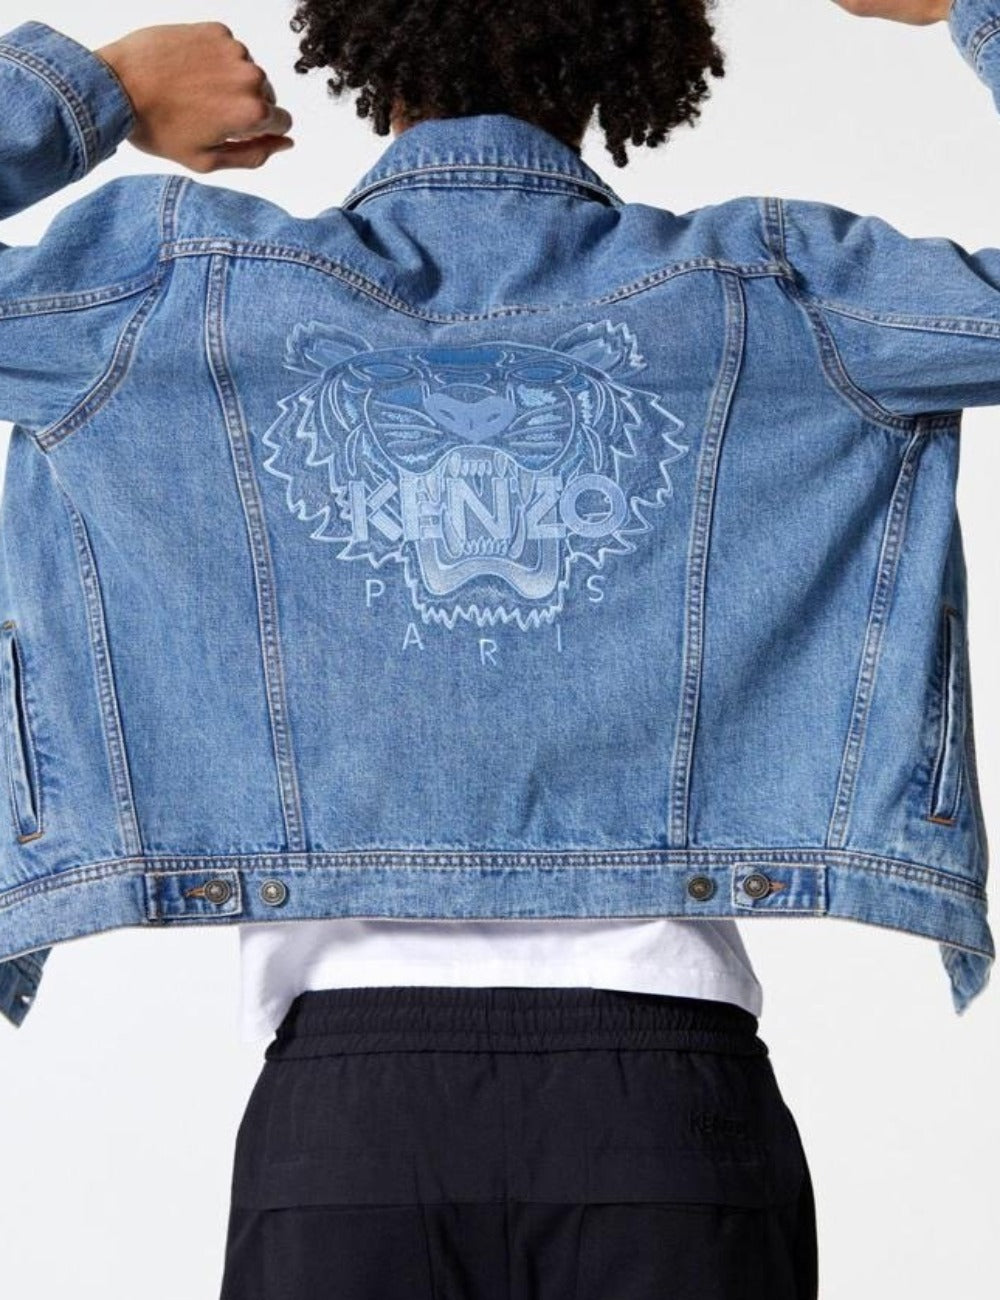 Kenzo Embroidered Tiger Denim Jacket - Shop Streetwear, Sneakers, Slippers and Gifts online | Malaysia - The Factory KL